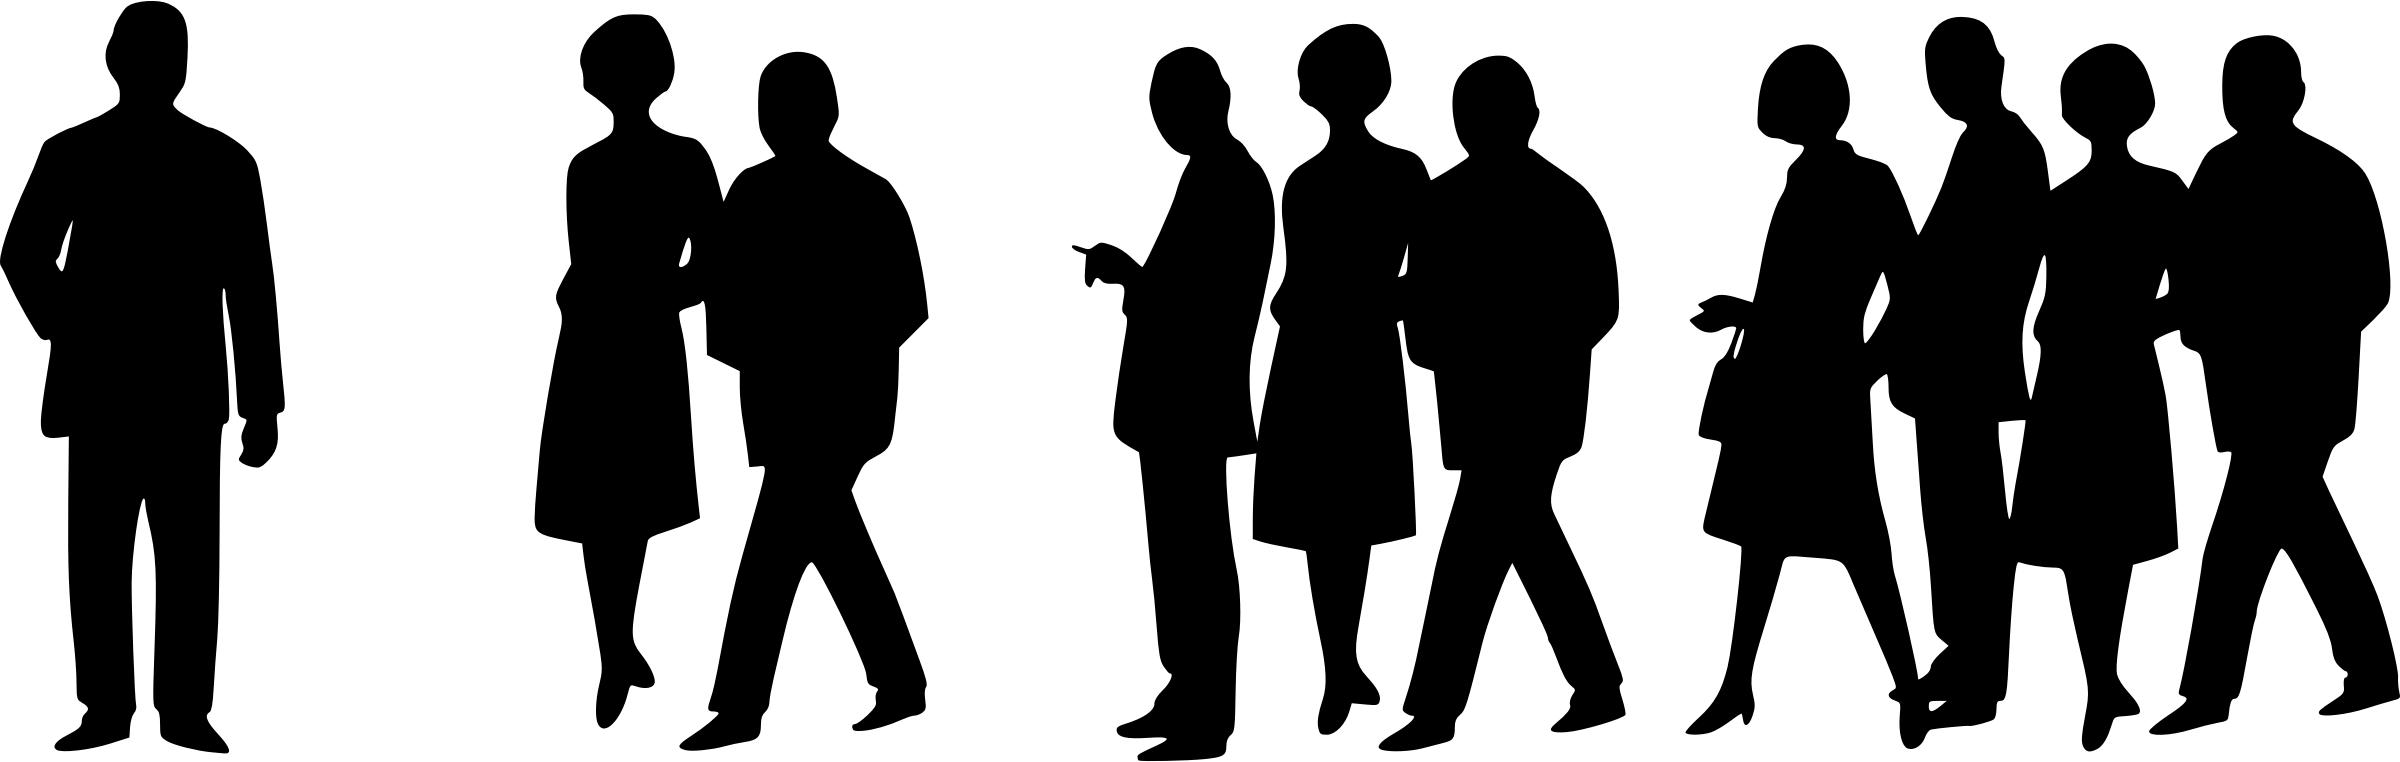 People Silhouettes - 60s Crowd png